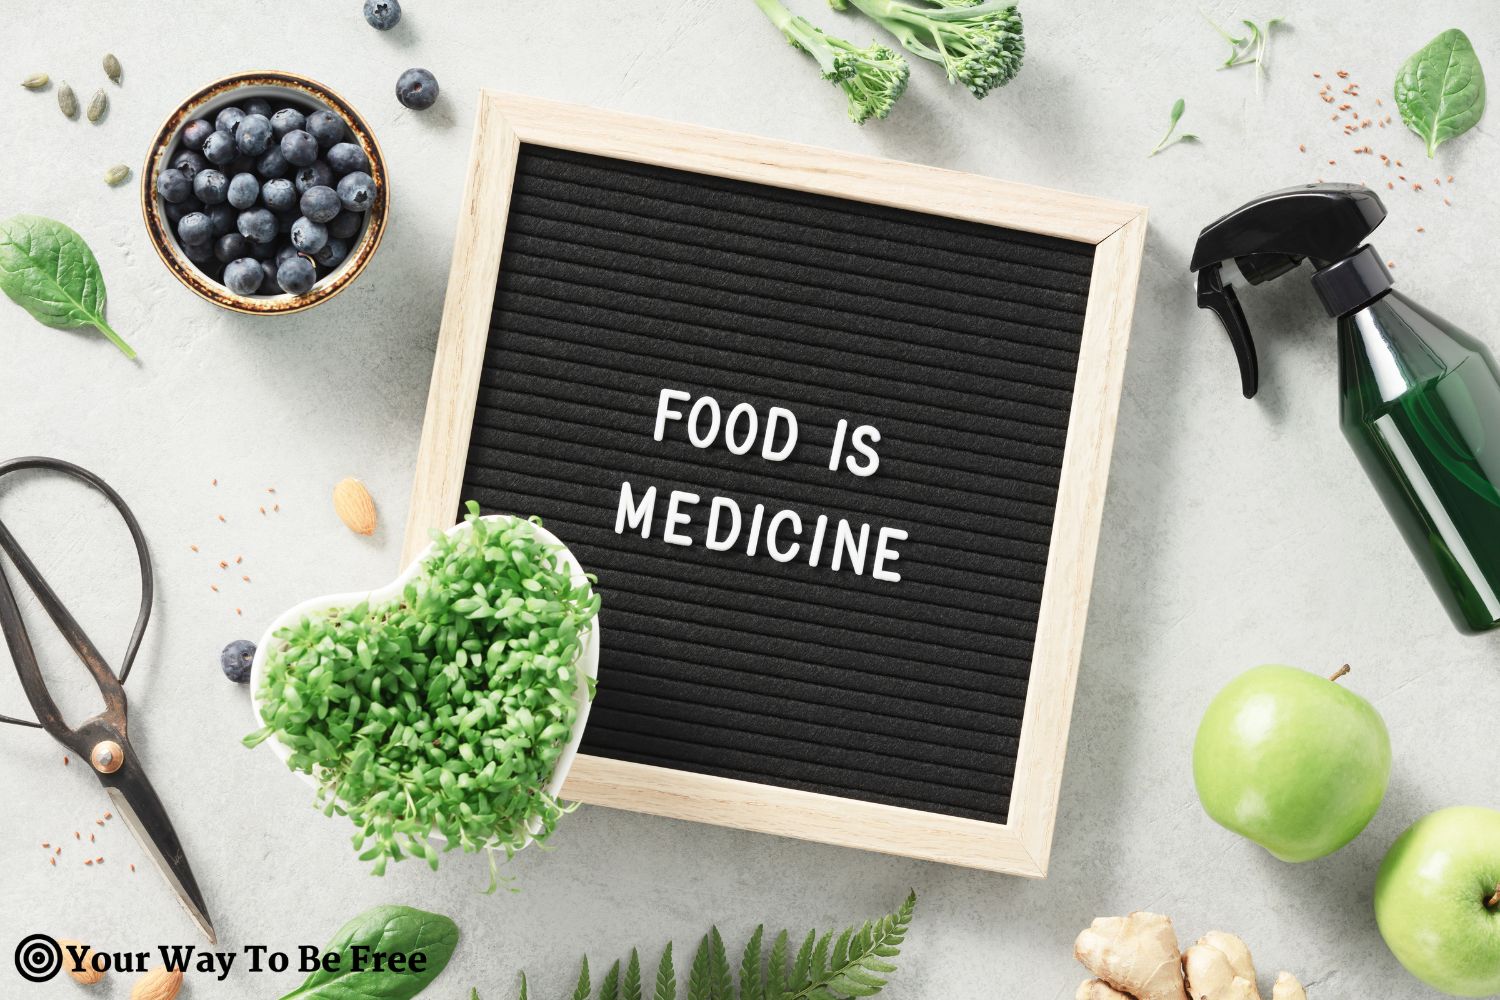 Food id medicine letter board quote flat lay. Healthy eating concept